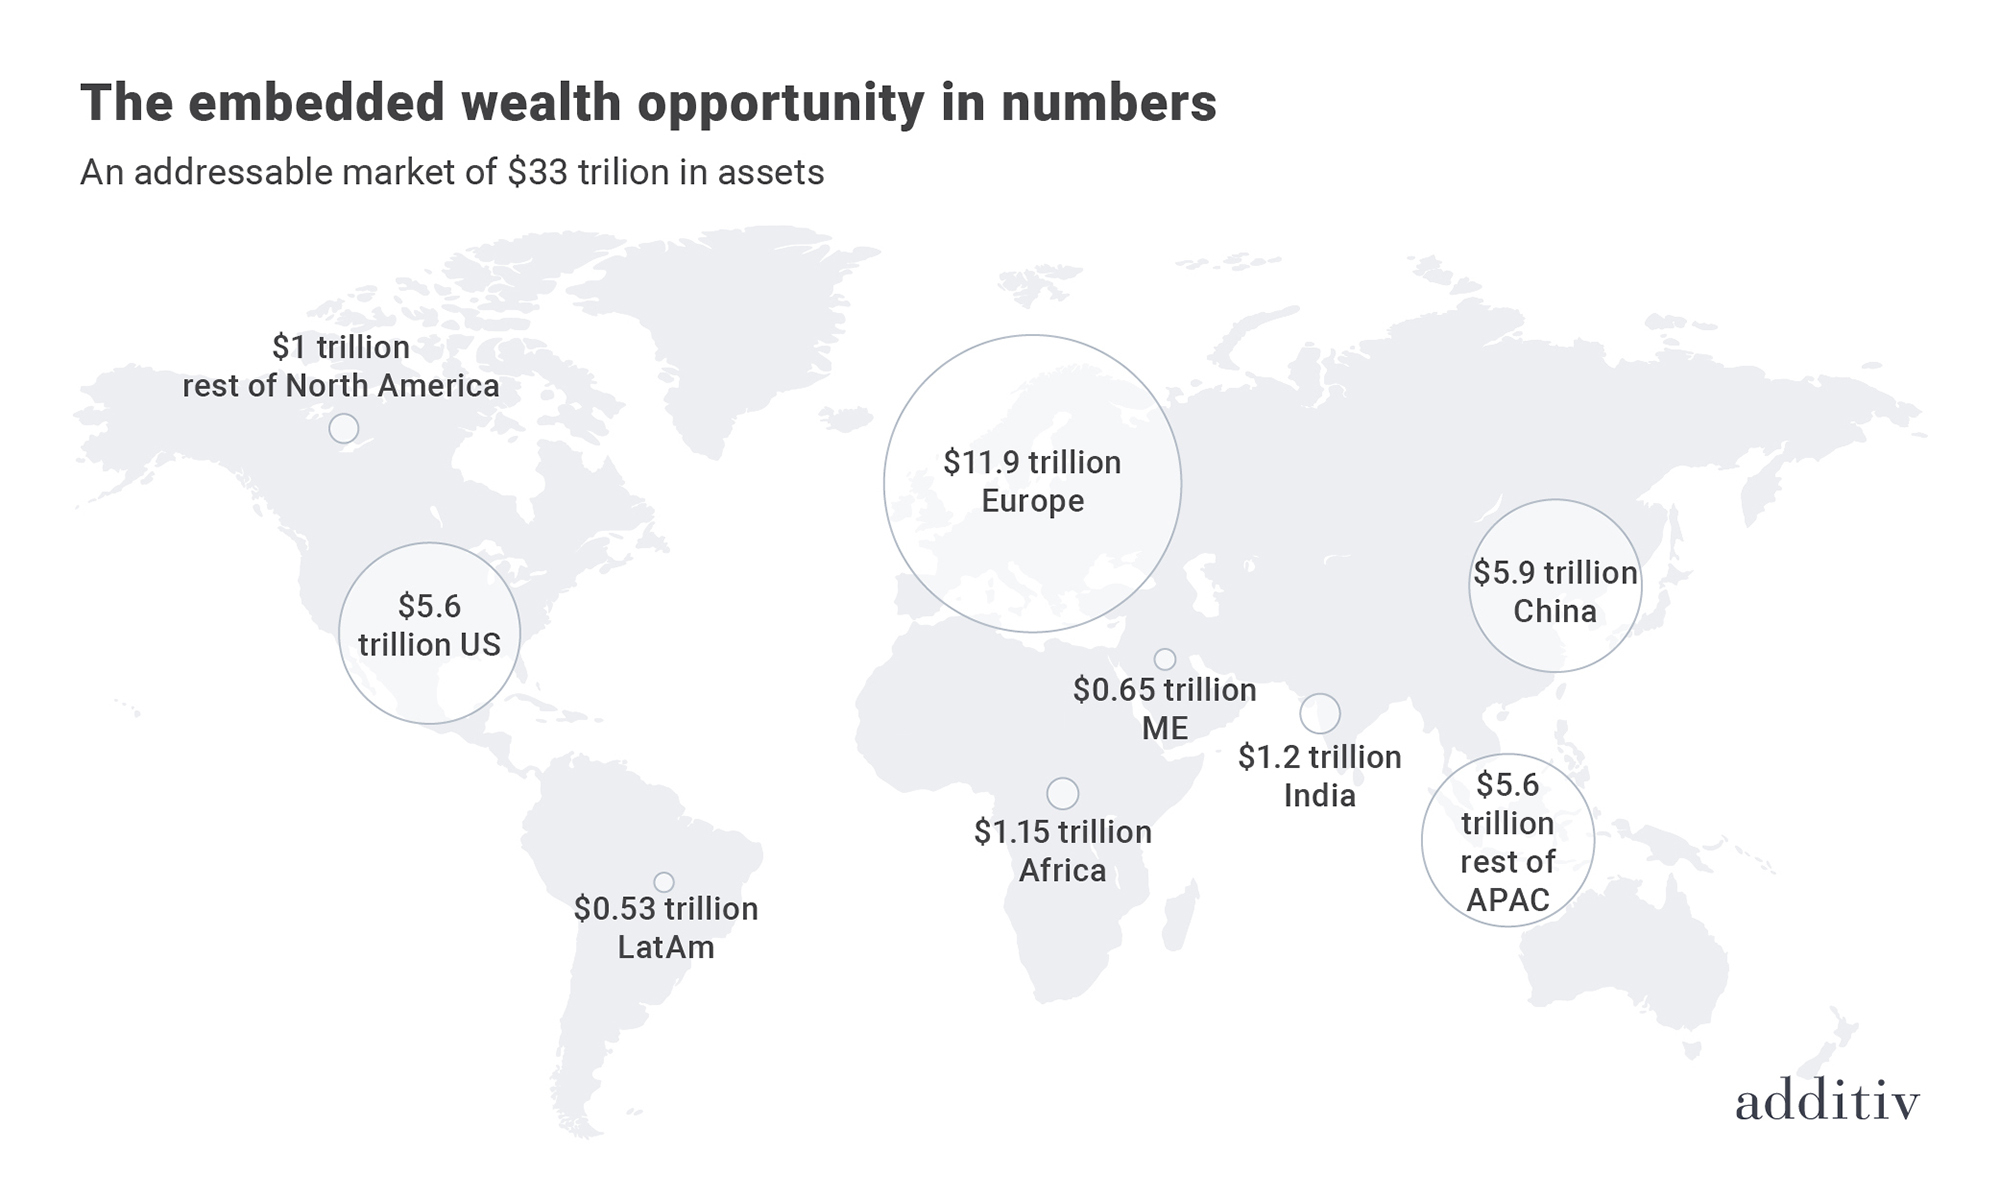 The wealth opportunity in numbers (an addressable market of $33 trillion in assets)